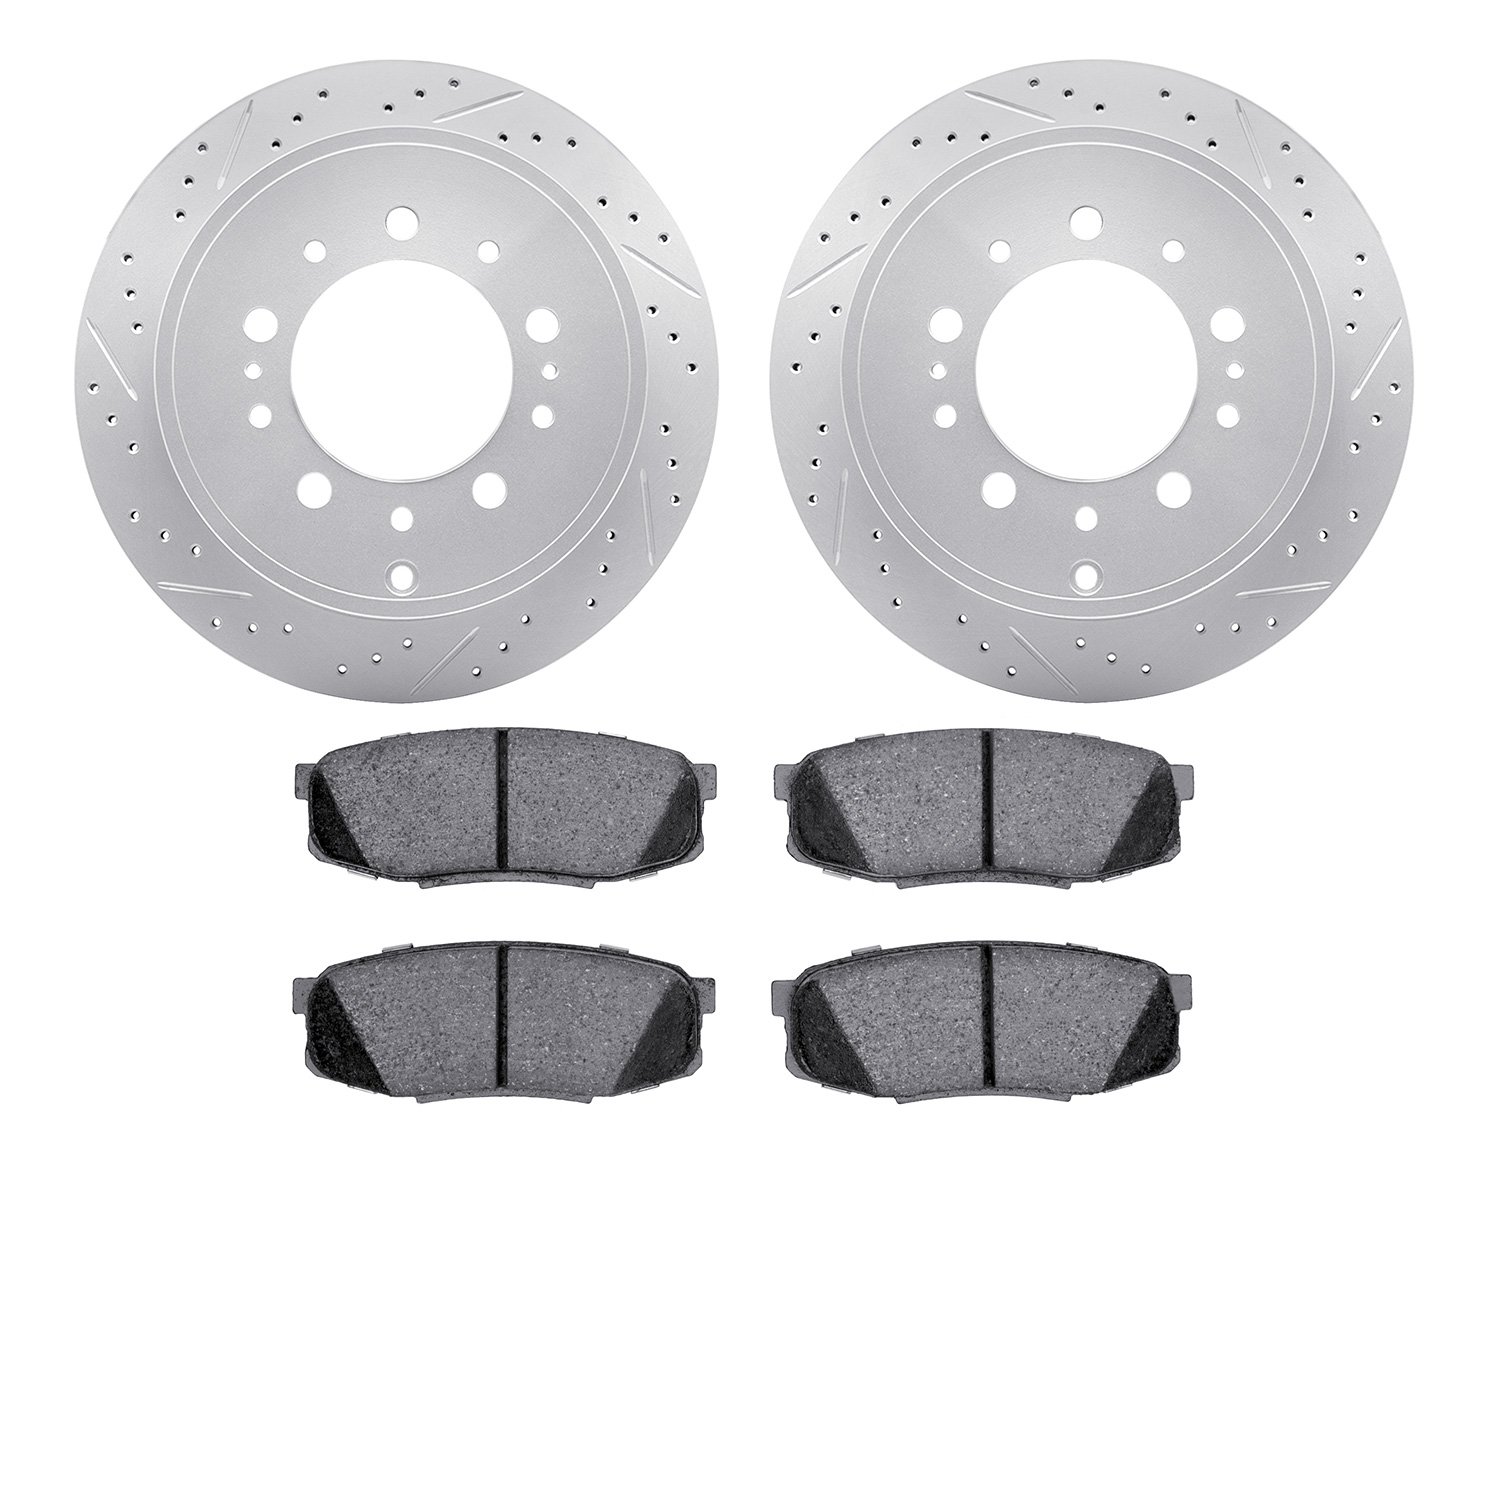 2502-76163 Geoperformance Drilled/Slotted Rotors w/5000 Advanced Brake Pads Kit, Fits Select Lexus/Toyota/Scion, Position: Rear